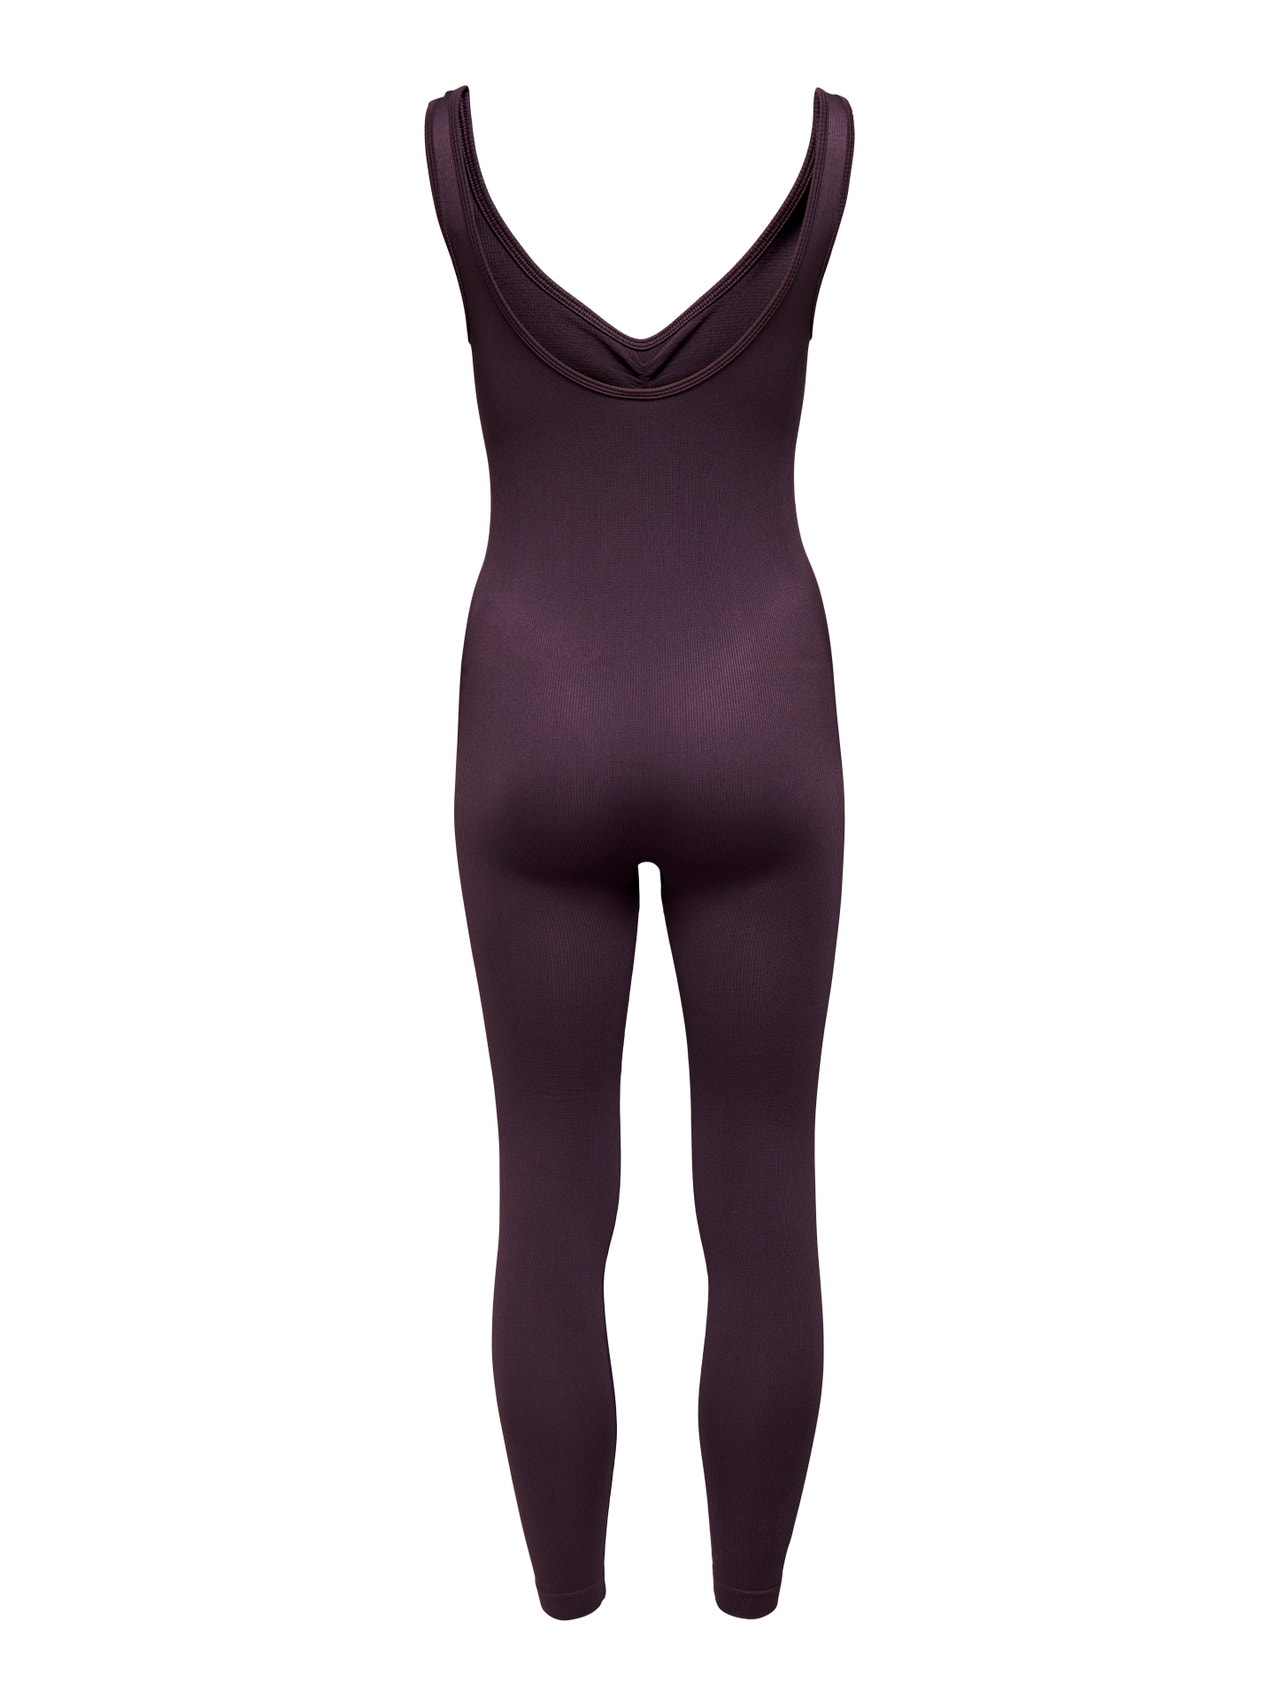 ONLY Training Jumpsuit -Plum Perfect - 15274890